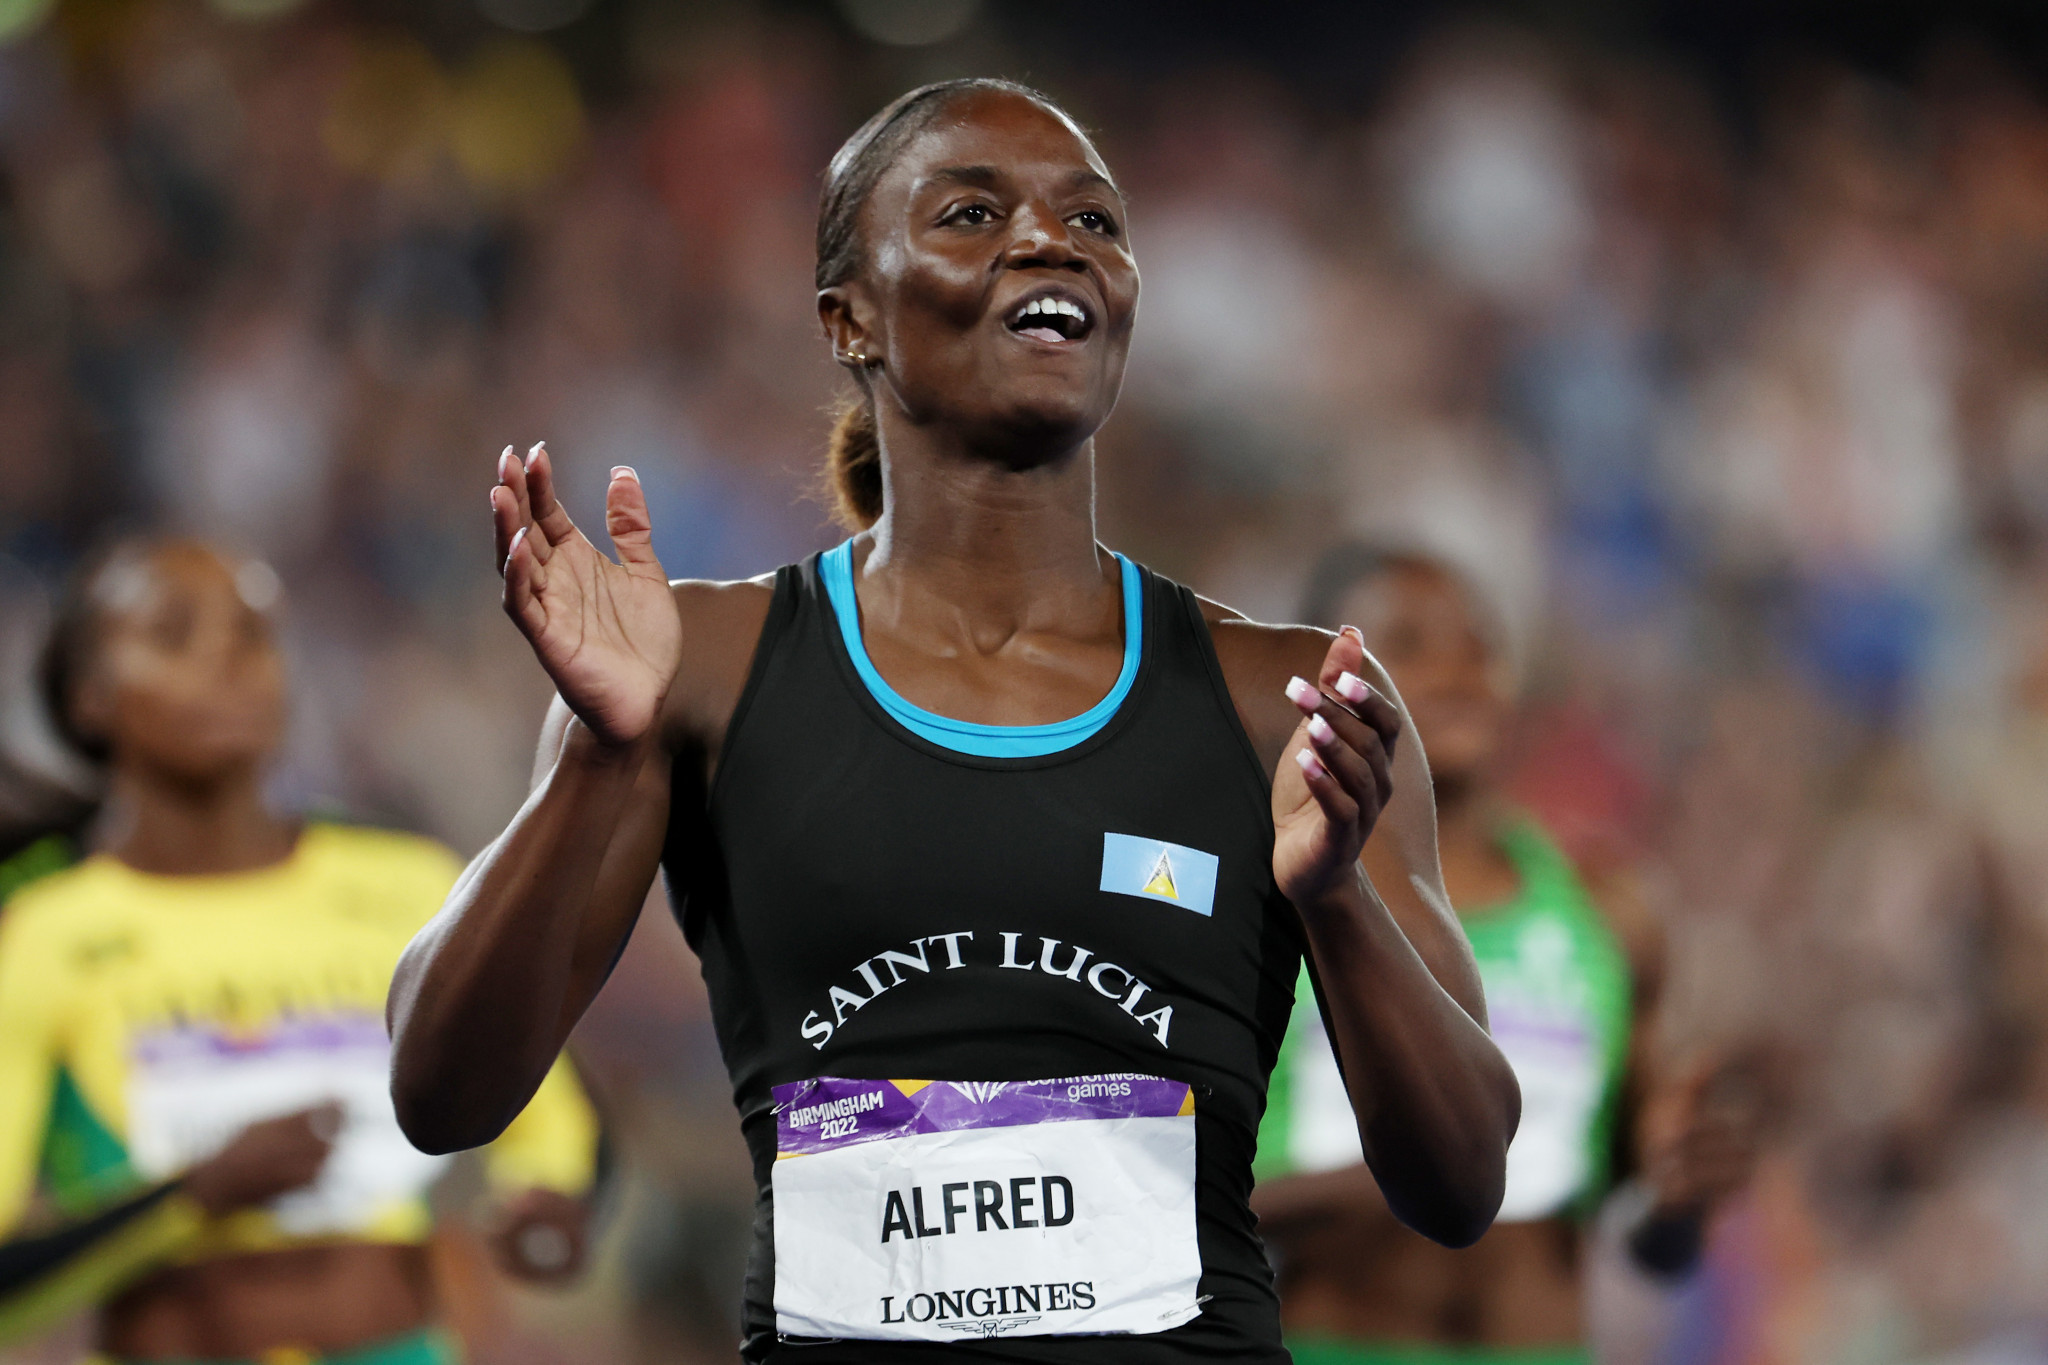 St Lucia has high hopes for sprinter Julien Alfred ©Getty Images